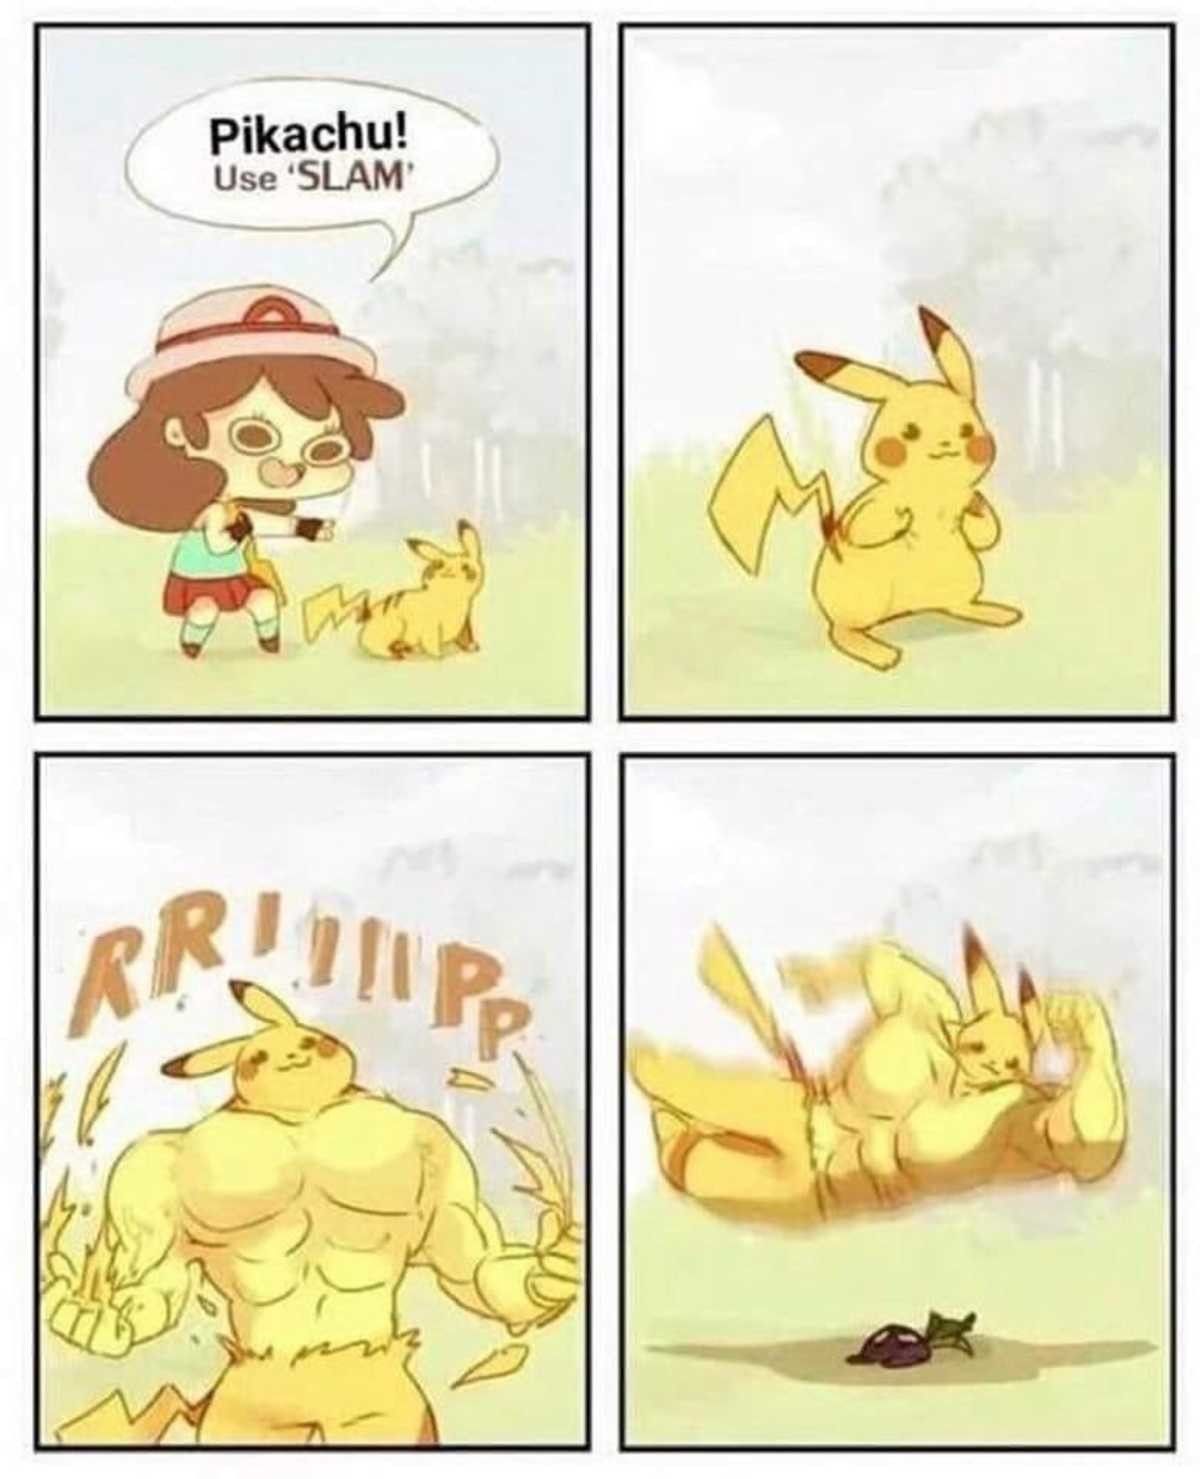 What other pokemon are secretly swole?